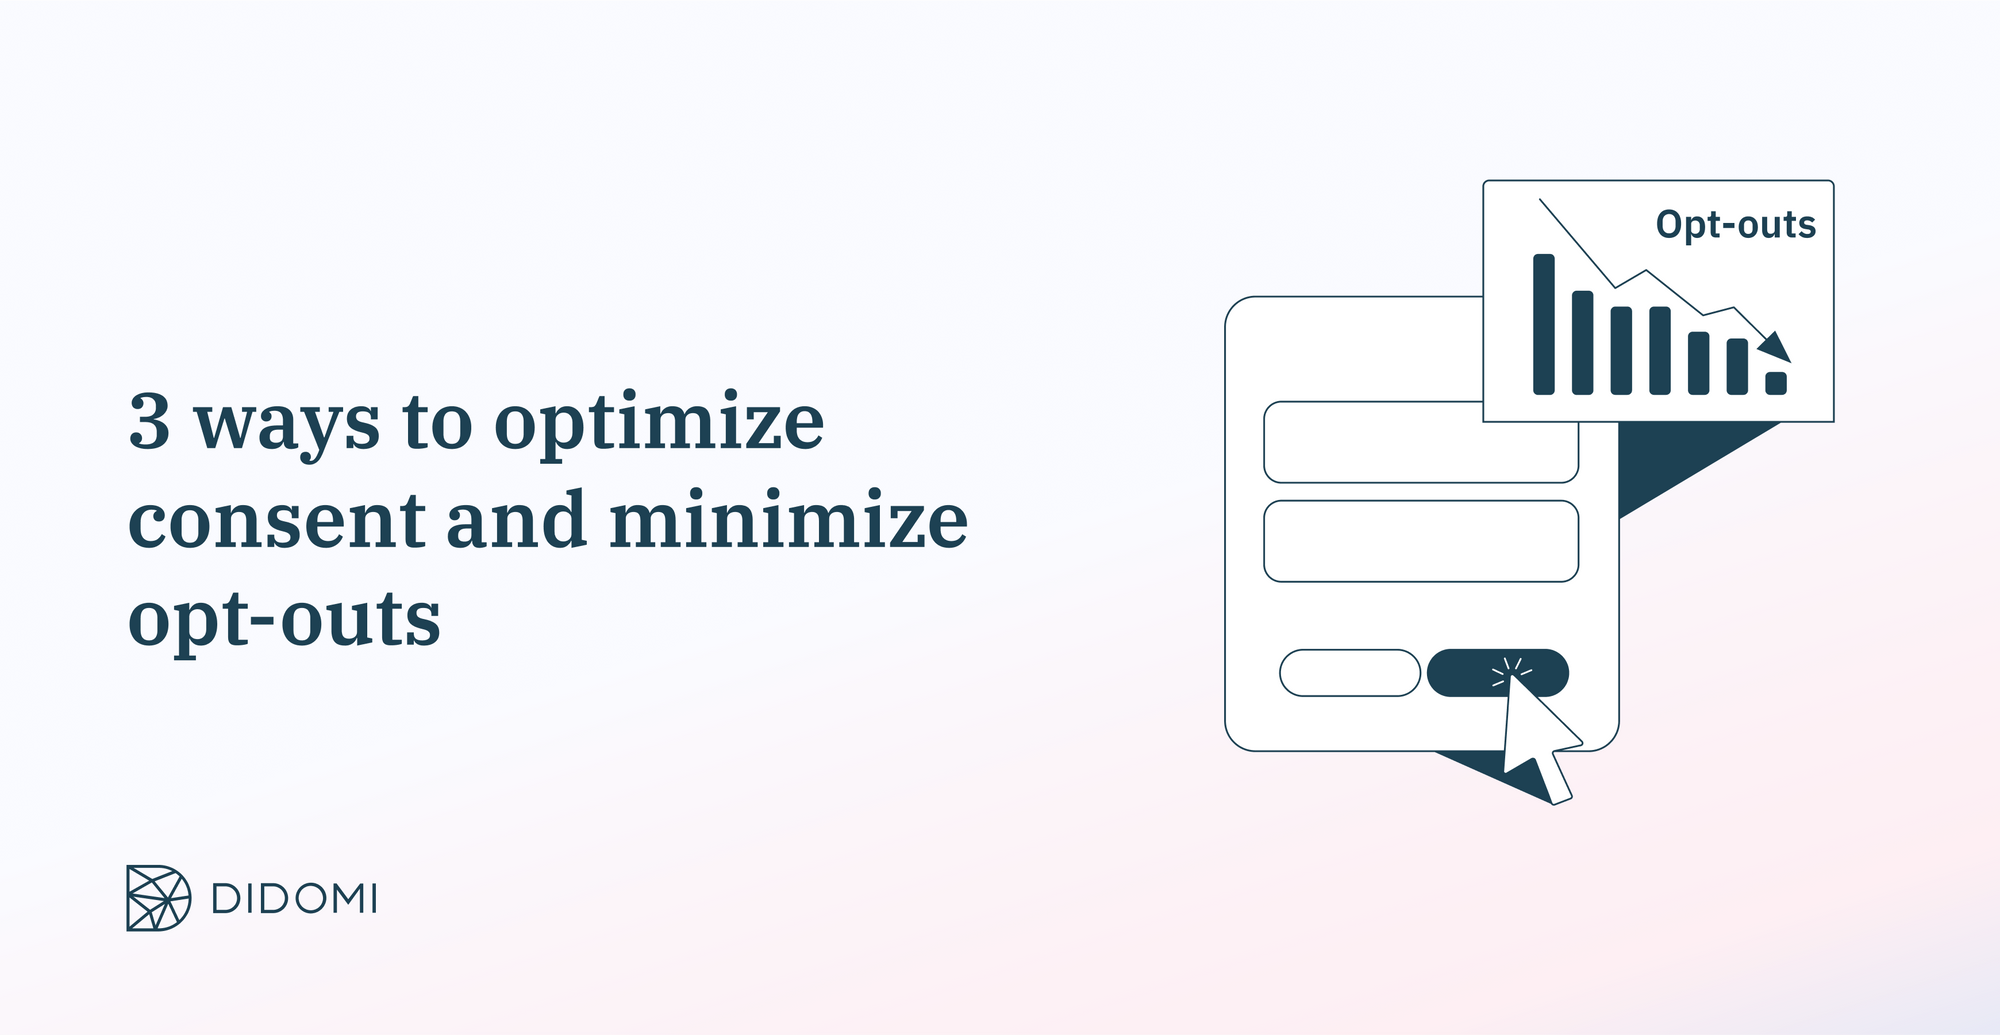 didomi-how-to-minimize-opt-outs